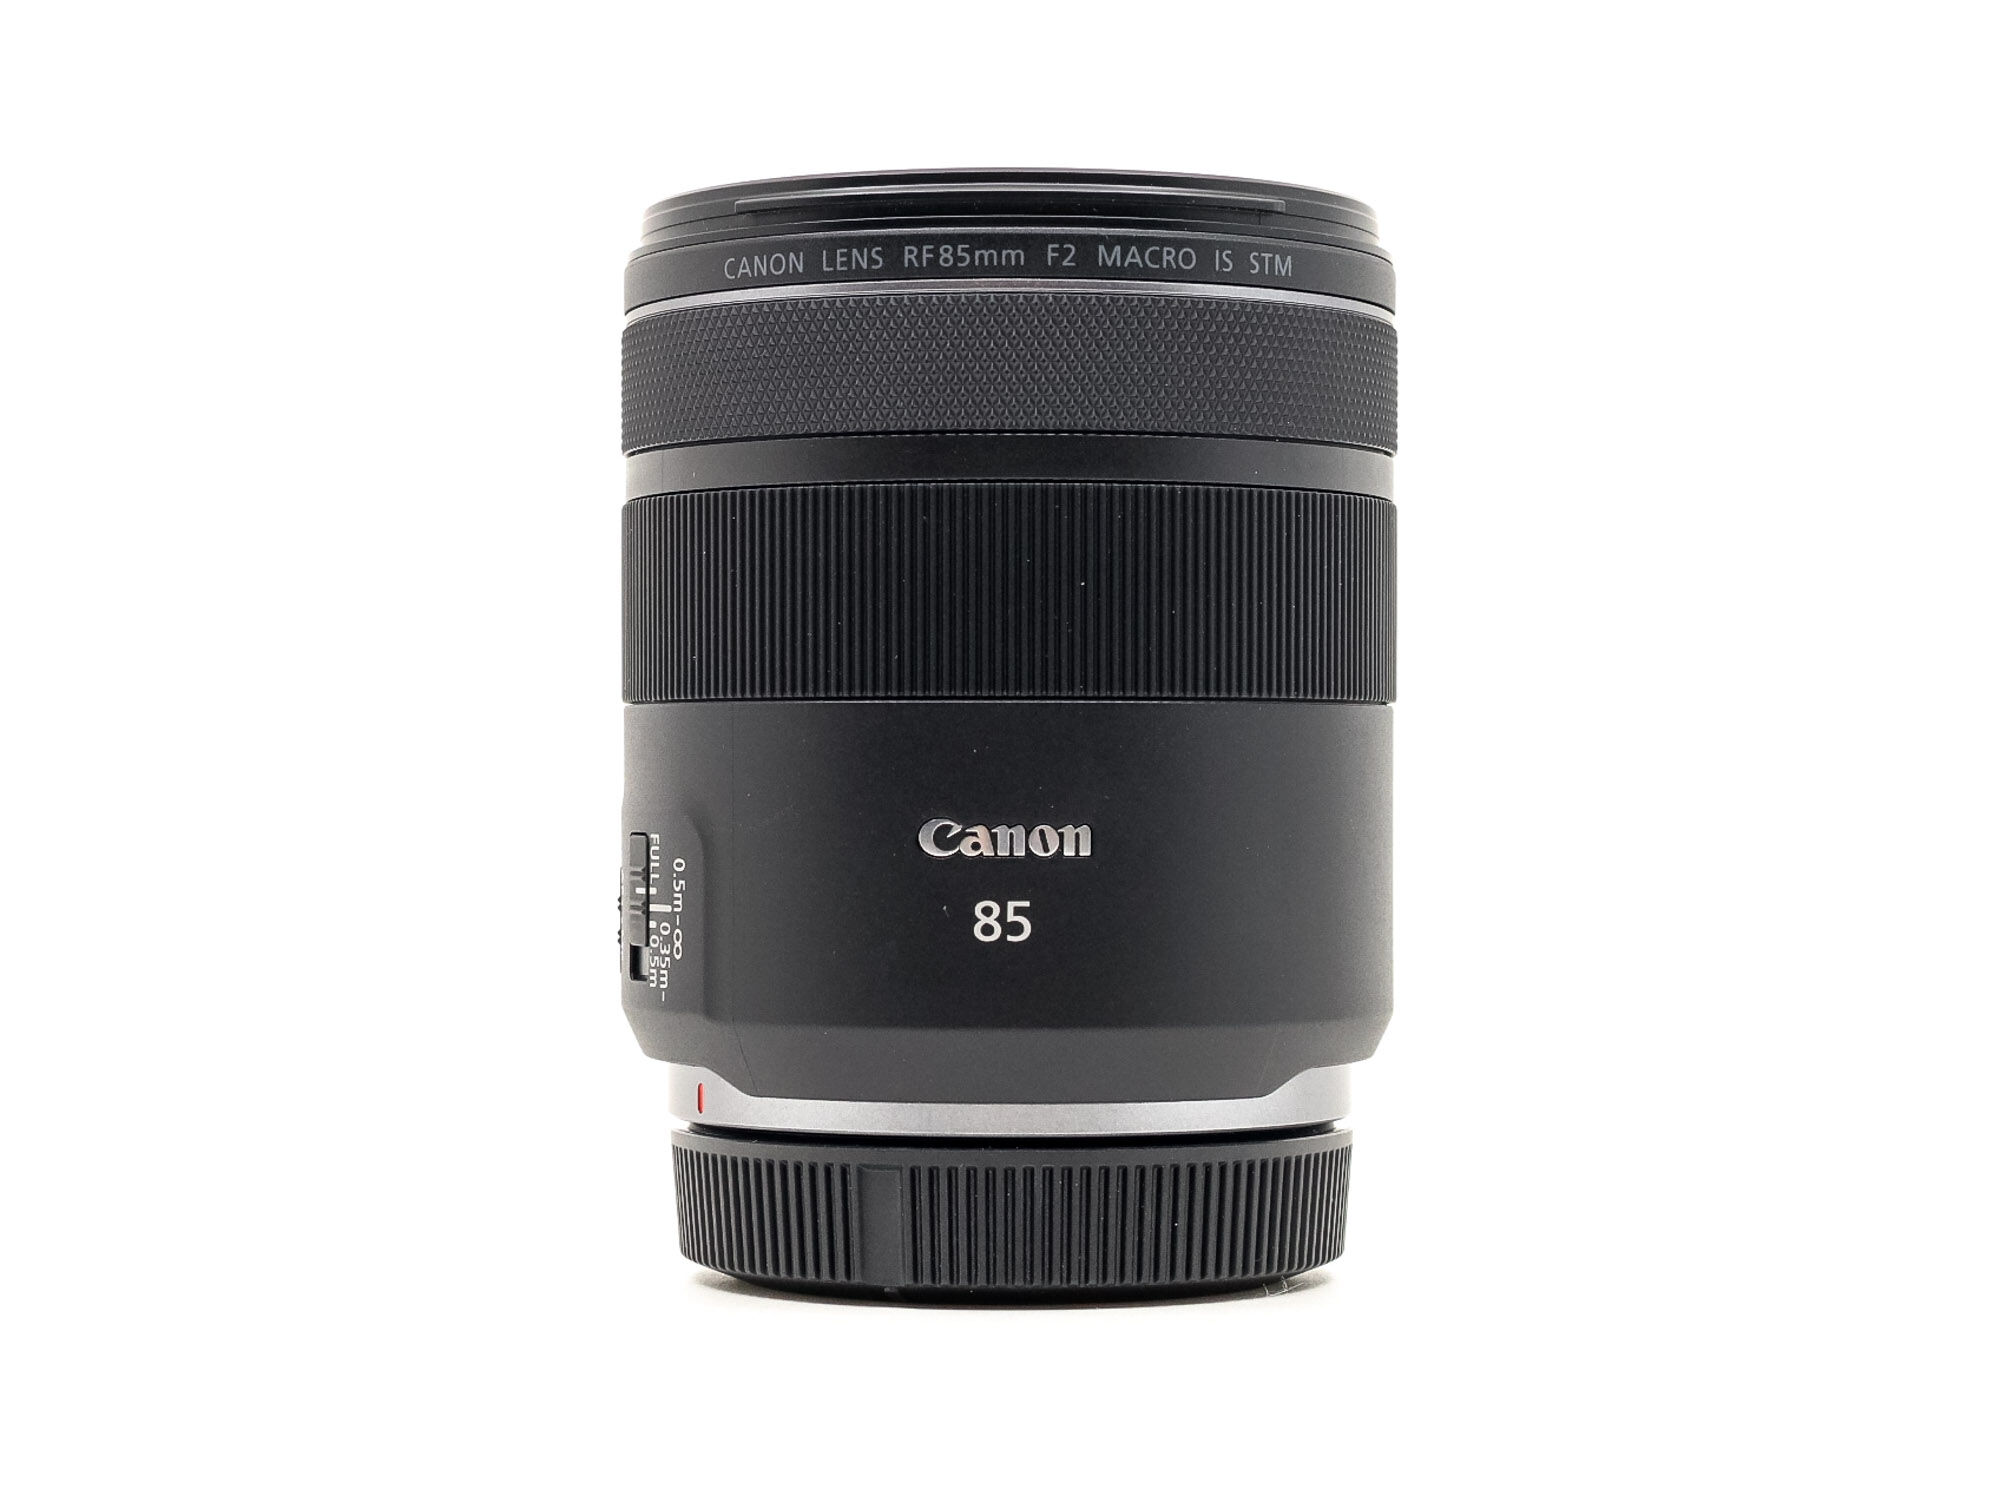 Canon RF 85mm f/2 Macro IS STM (Condition: Like New)